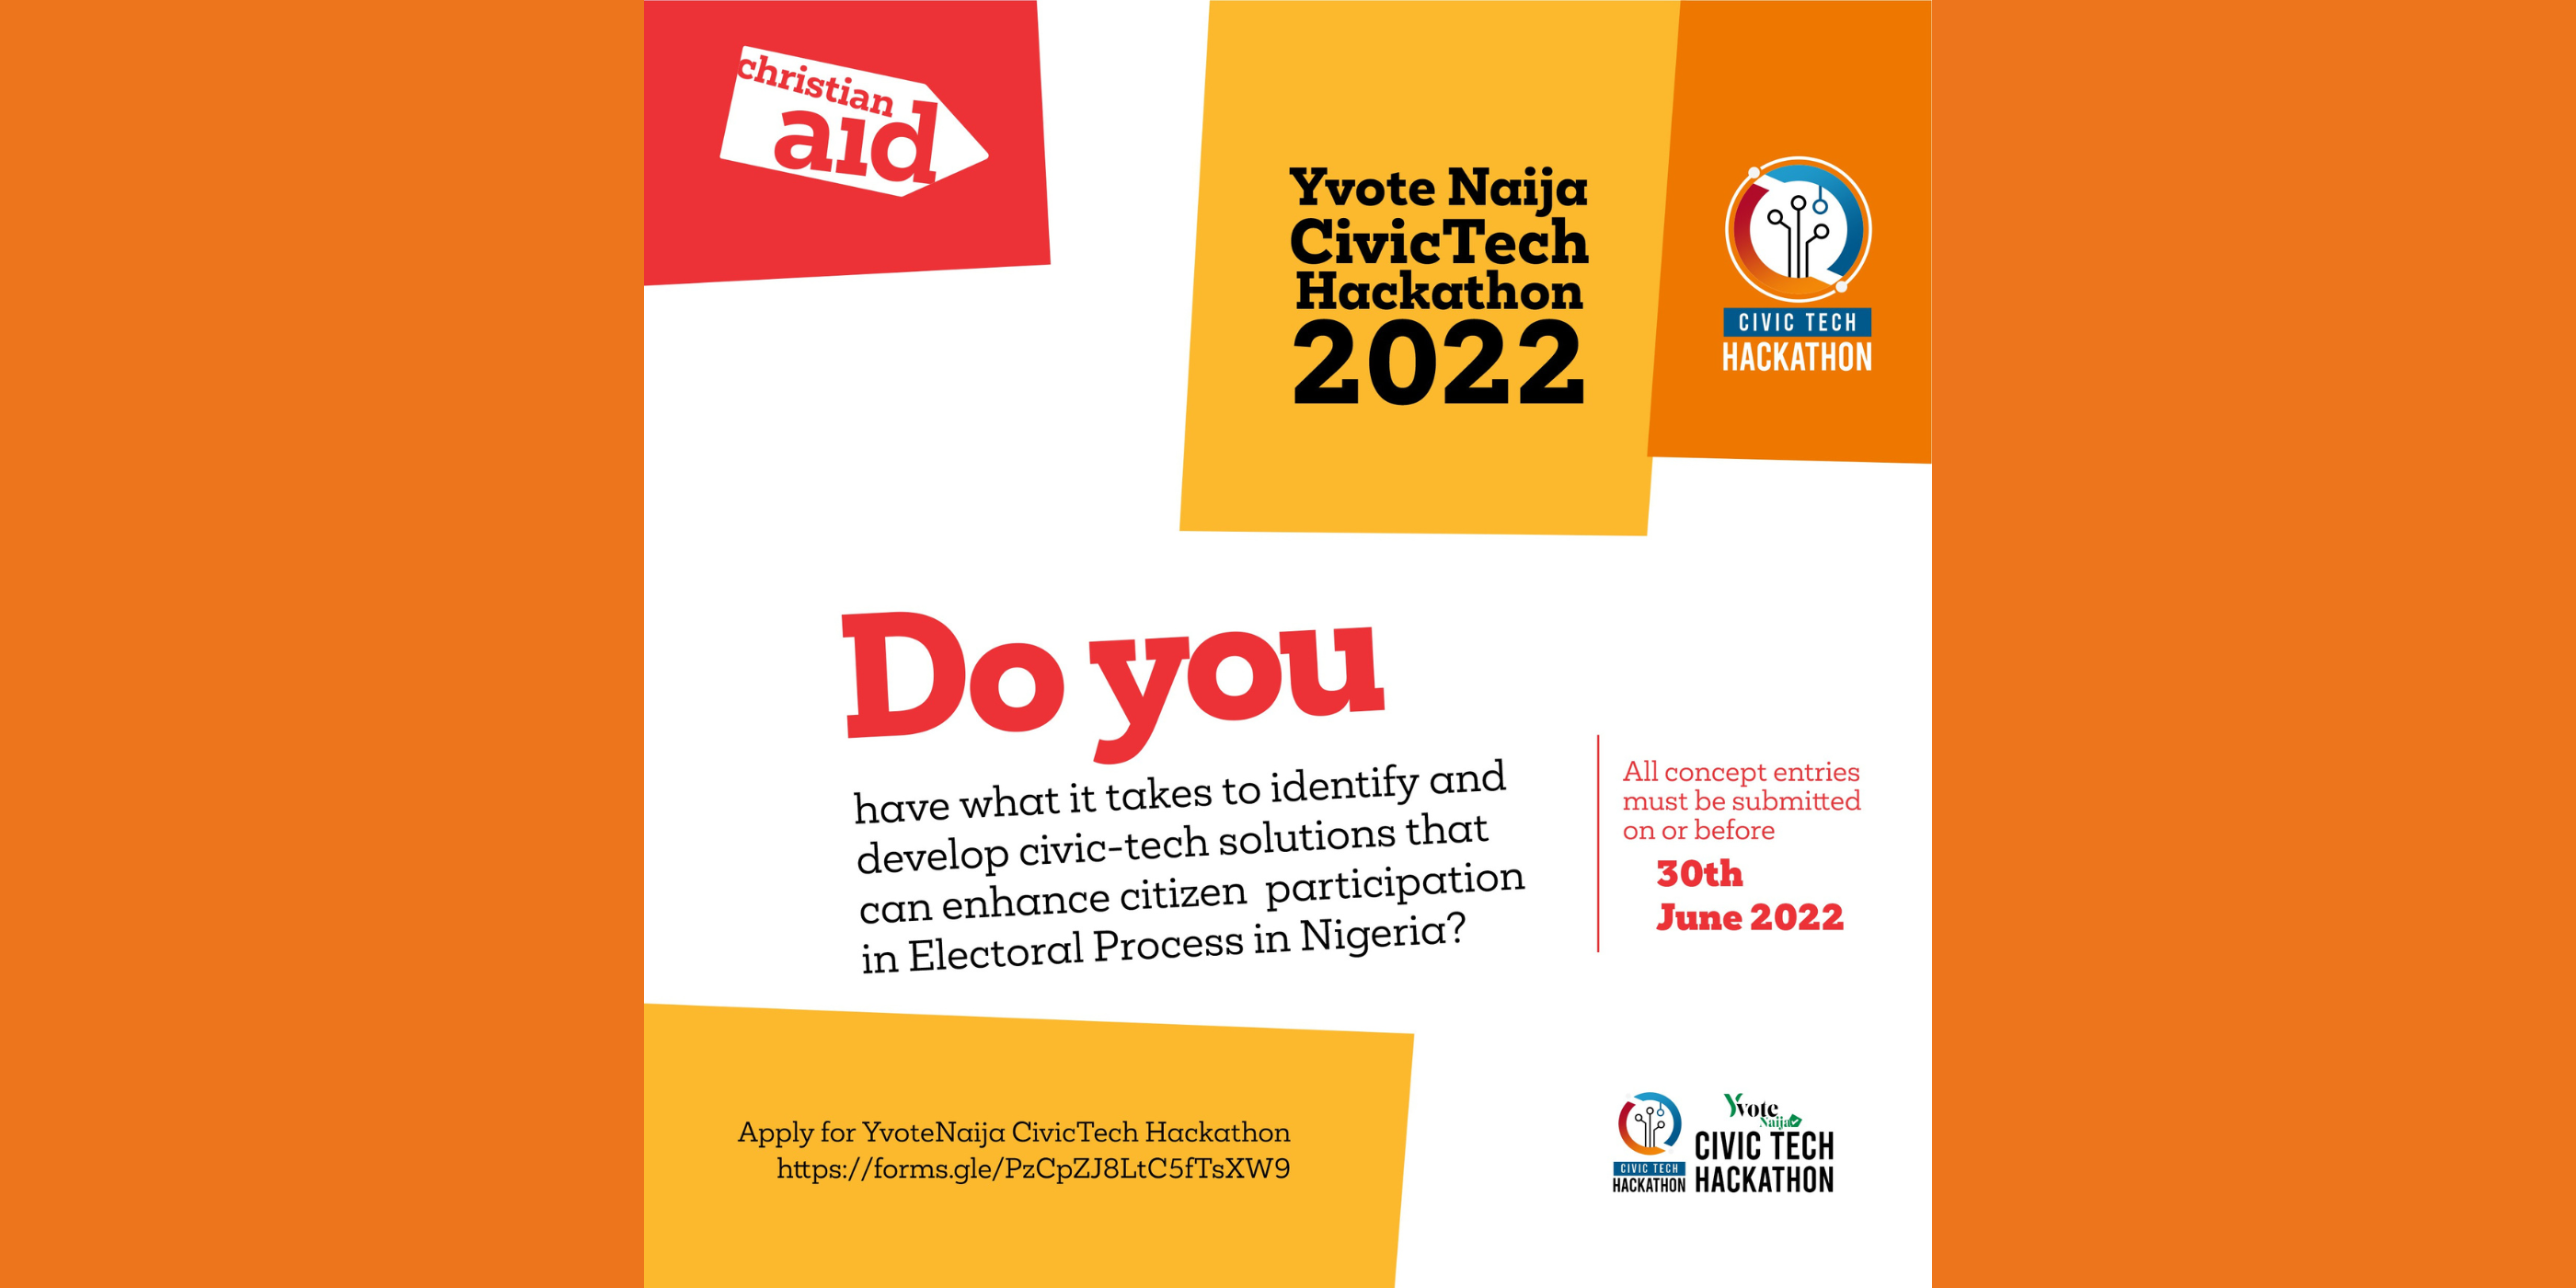 BBYDI partners with Christian Aid to address voter apathy in Nigeria